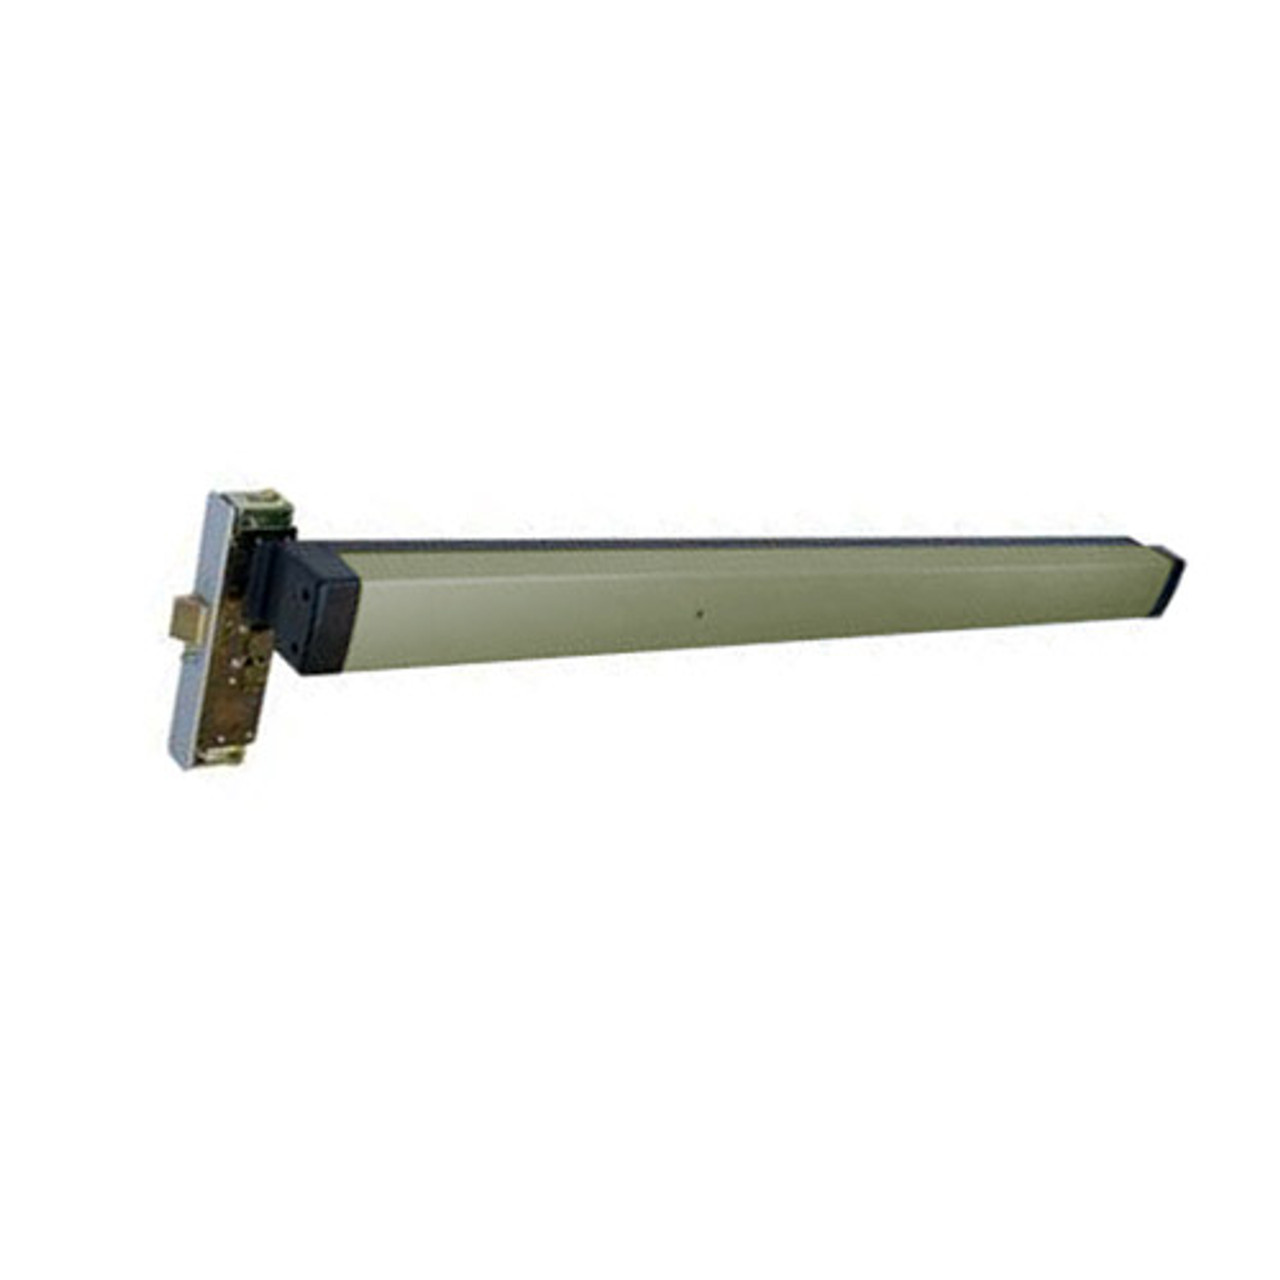 3300-70-36-US32 Adams Rite Mortise Exit Device